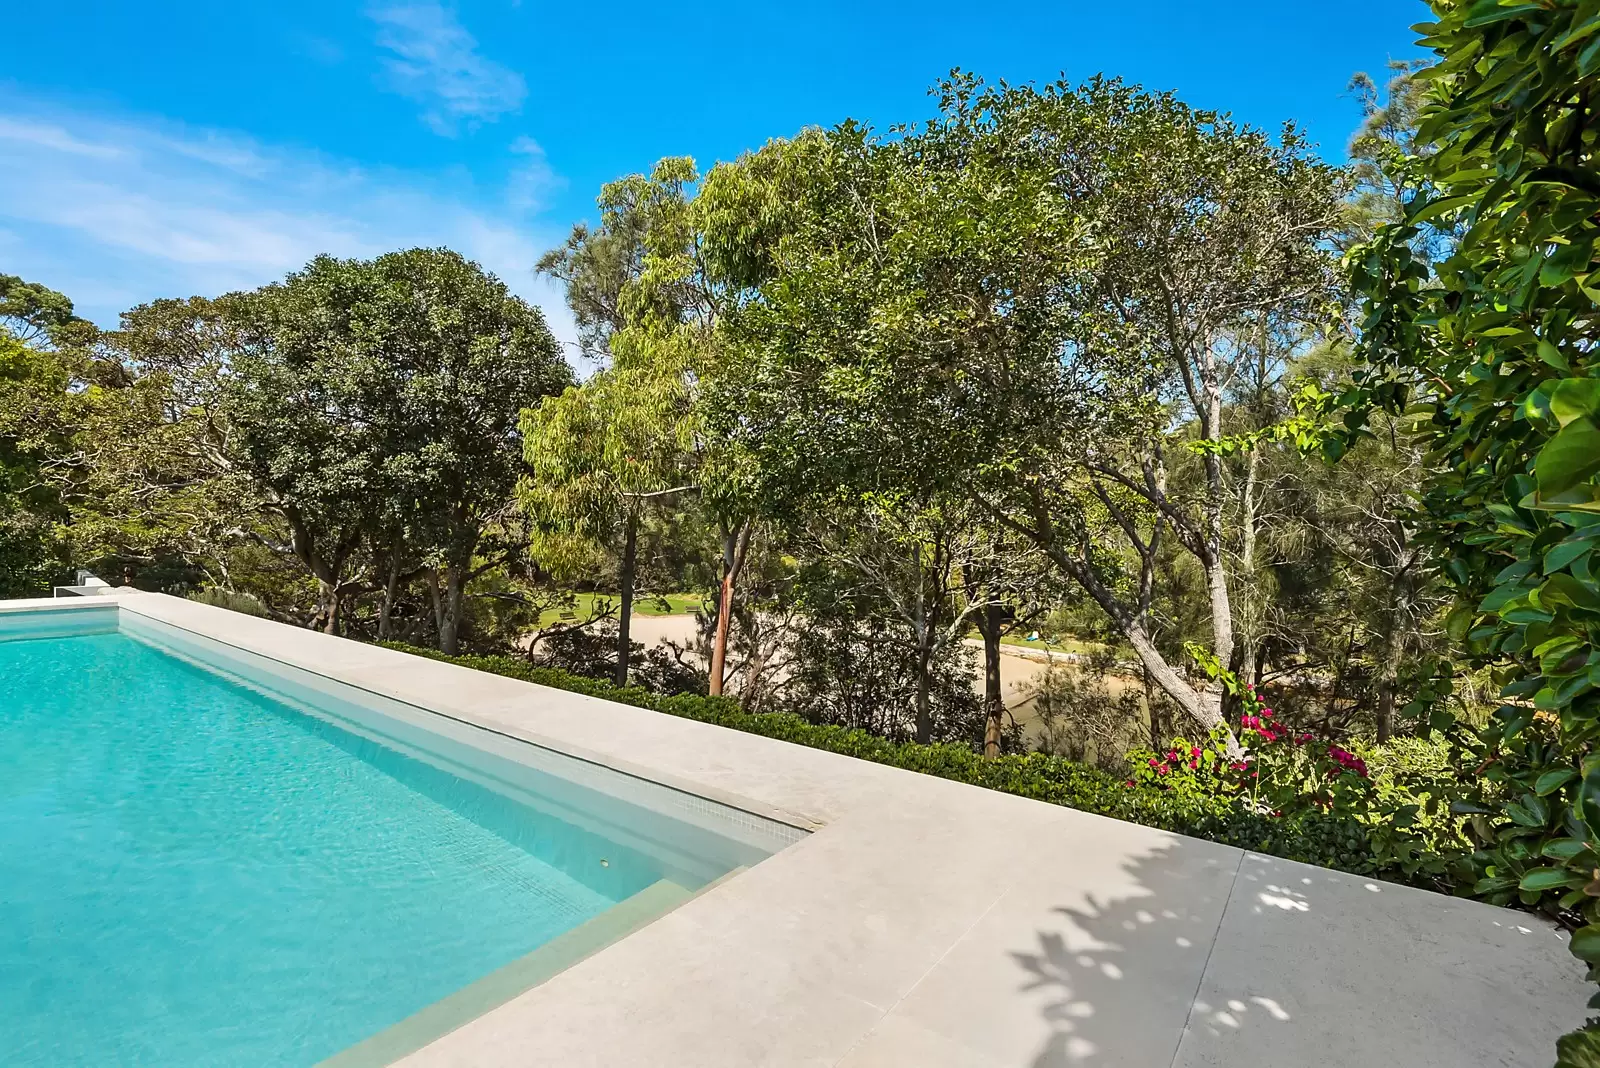 Photo #20: 10 The Crescent, Vaucluse - Sold by Sydney Sotheby's International Realty